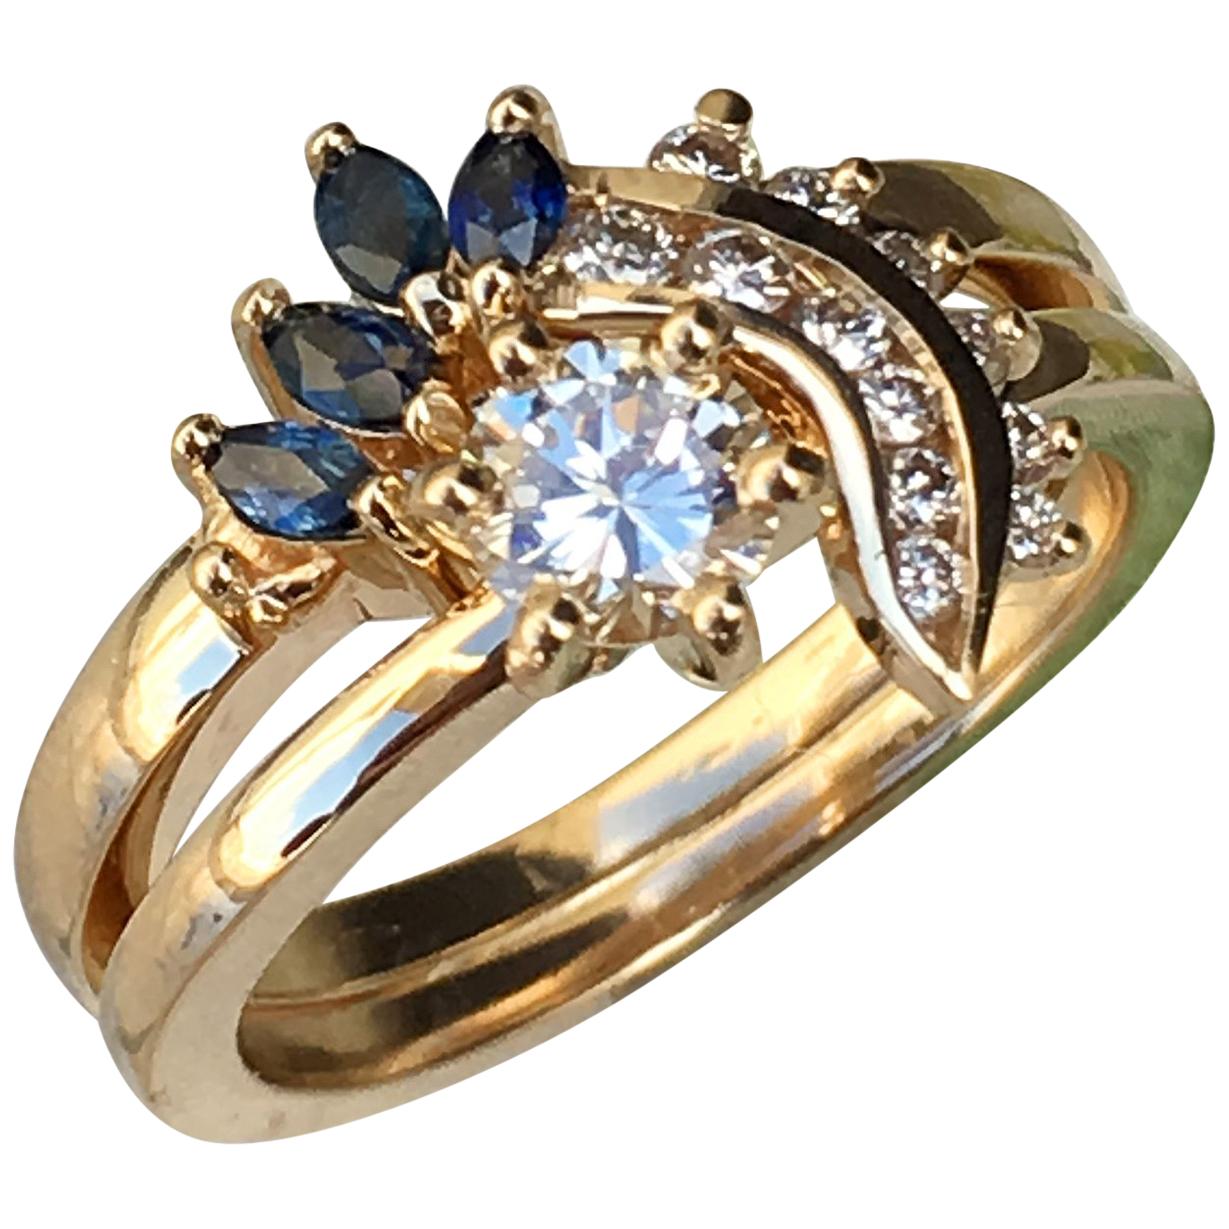 2 Carat Approximate Round Diamond and Sapphire Ring-Ben Dannie For Sale